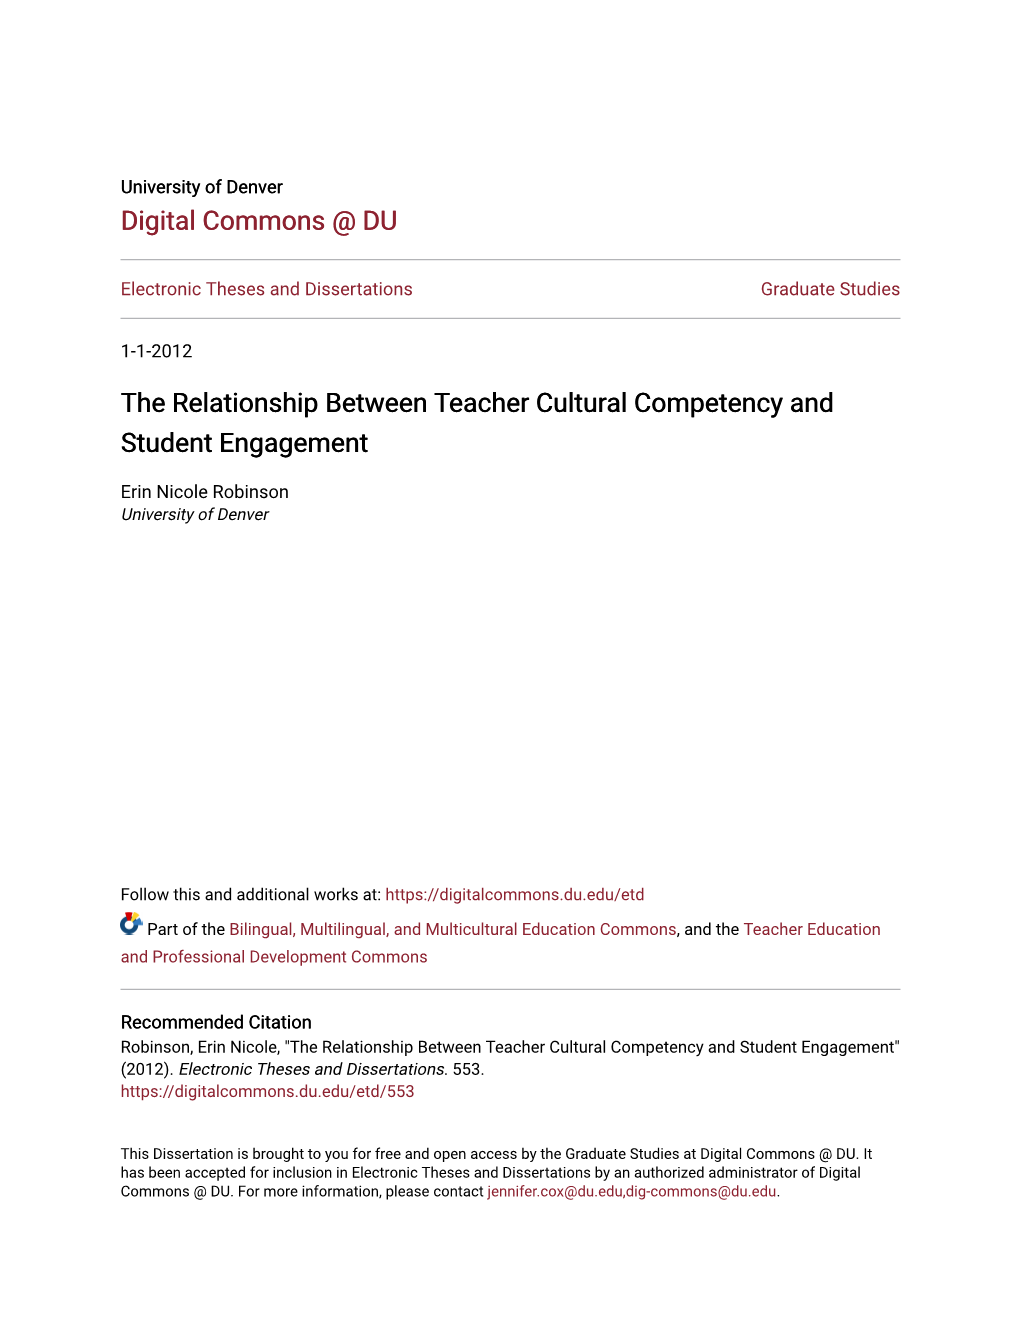 The Relationship Between Teacher Cultural Competency and Student Engagement